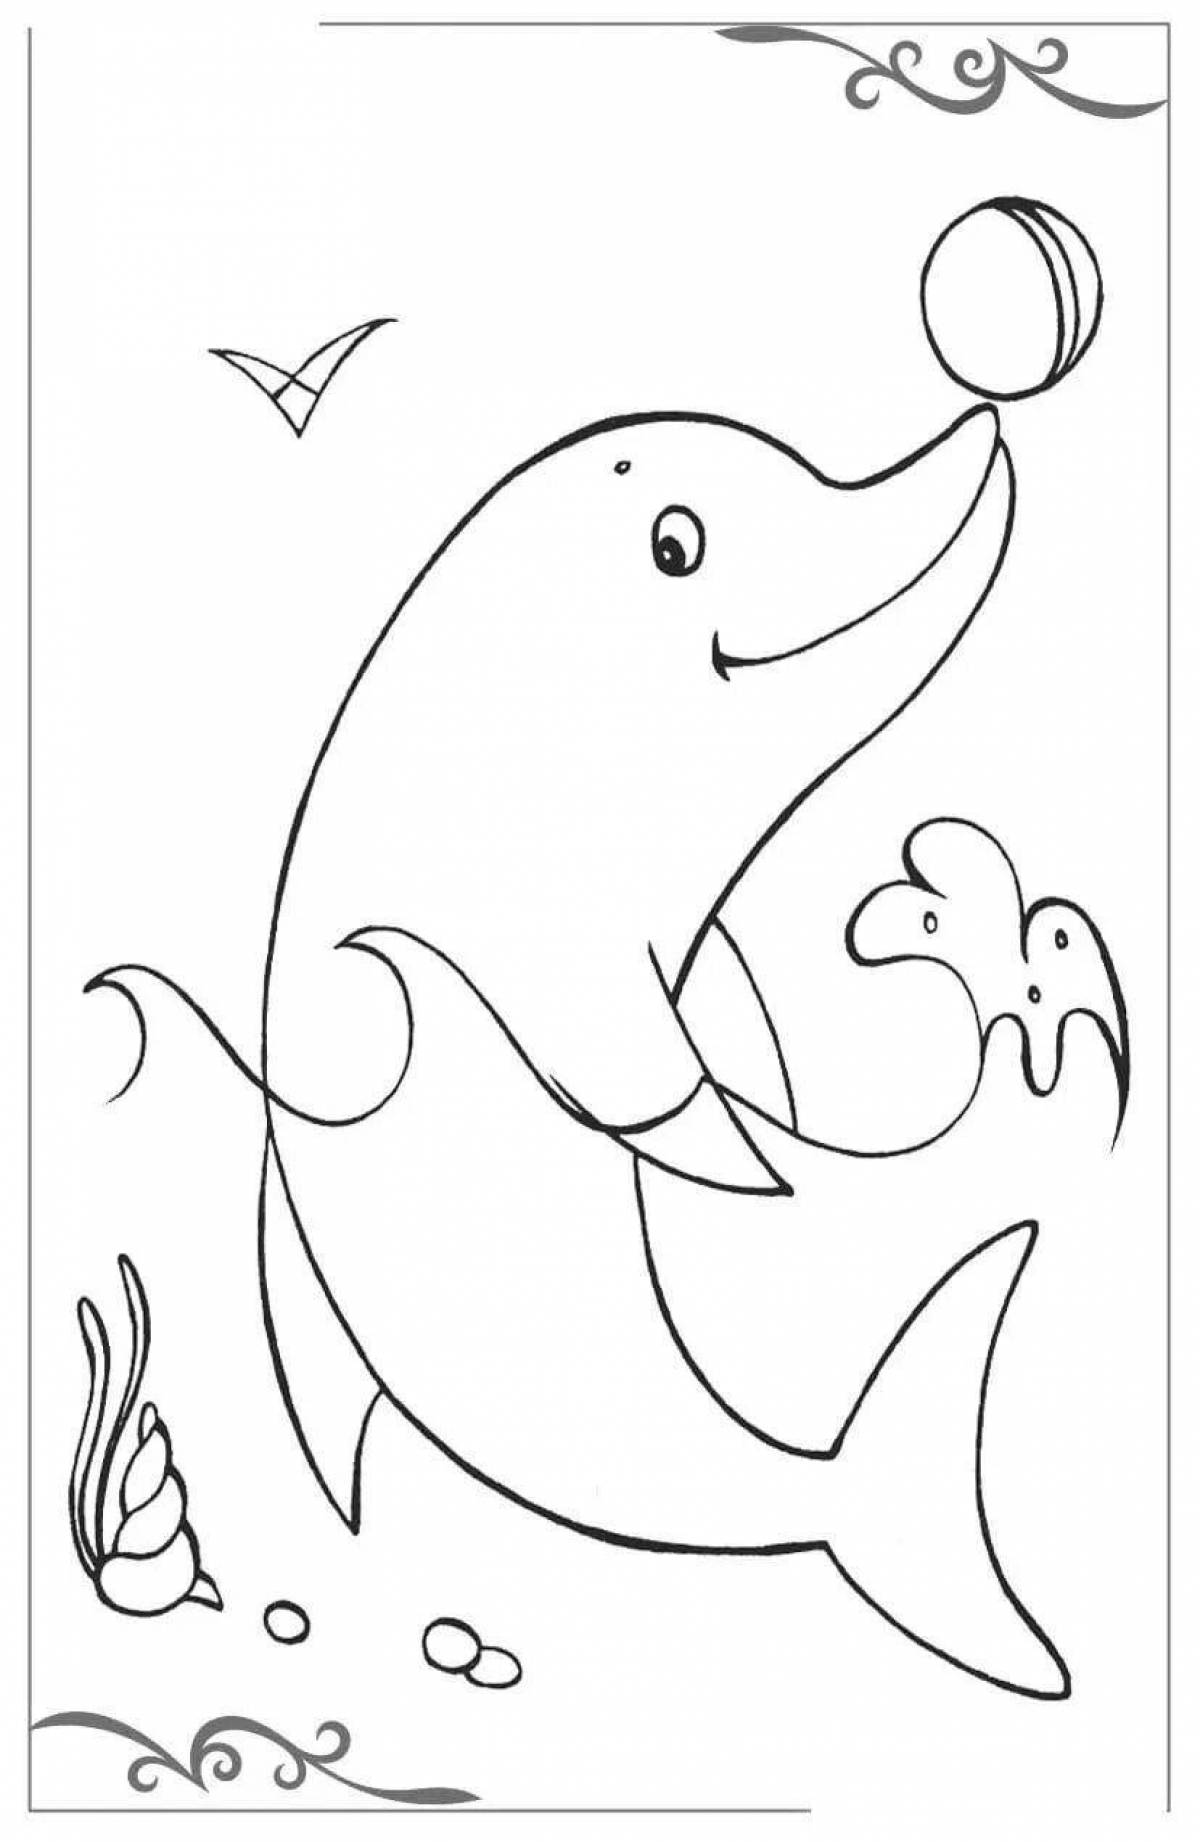 Rampant dolphin coloring pages for kids